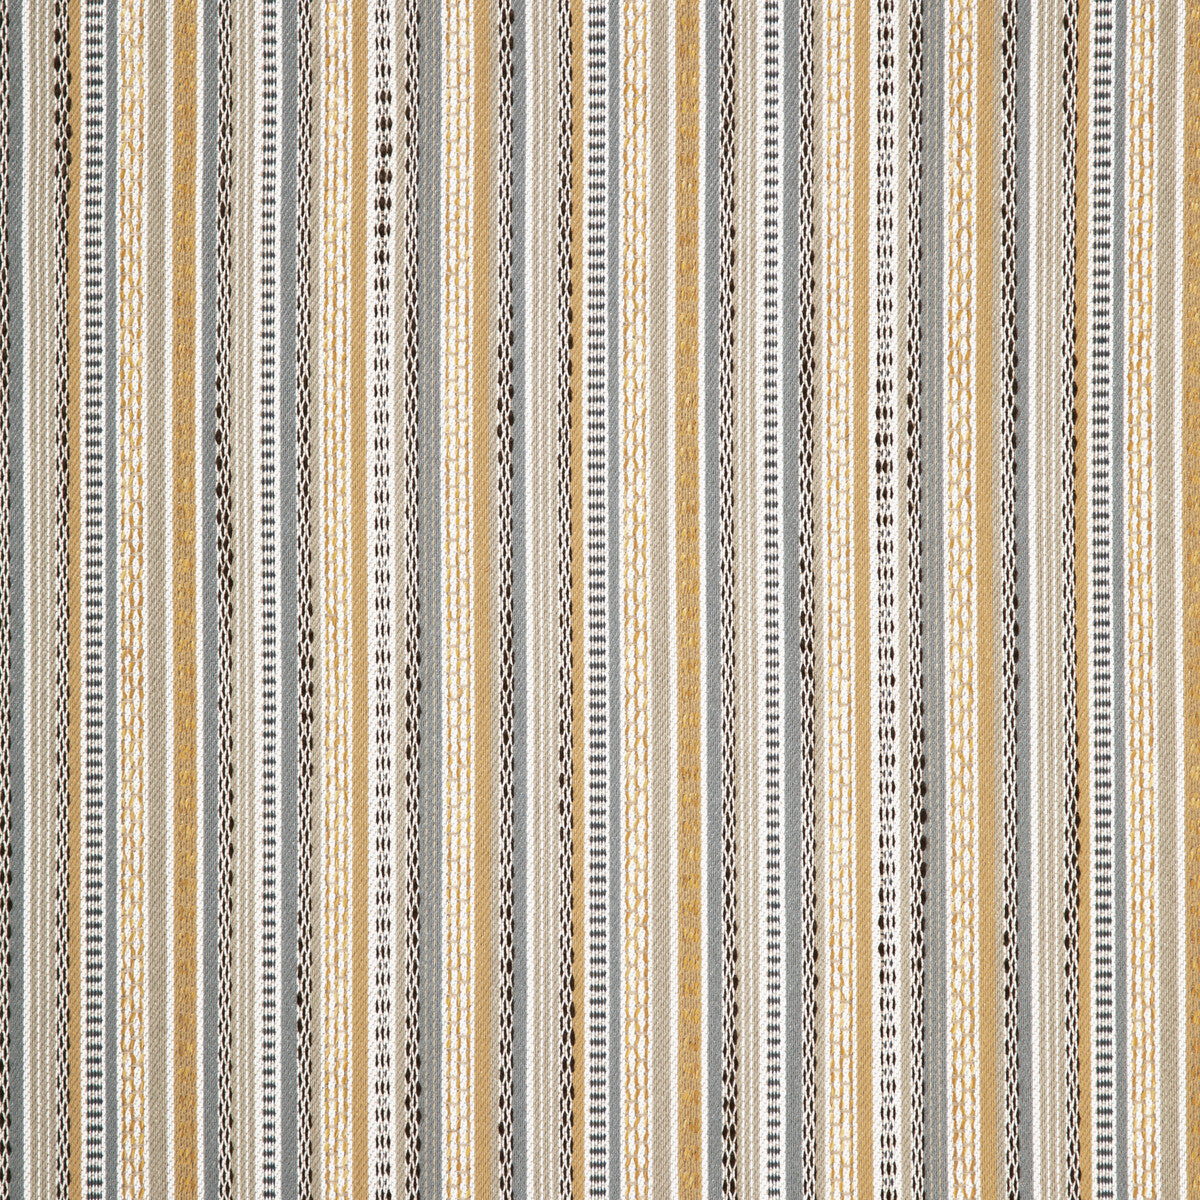 Kisco fabric in bronze color - pattern 36264.1611.0 - by Kravet Contract in the Gis Crypton collection